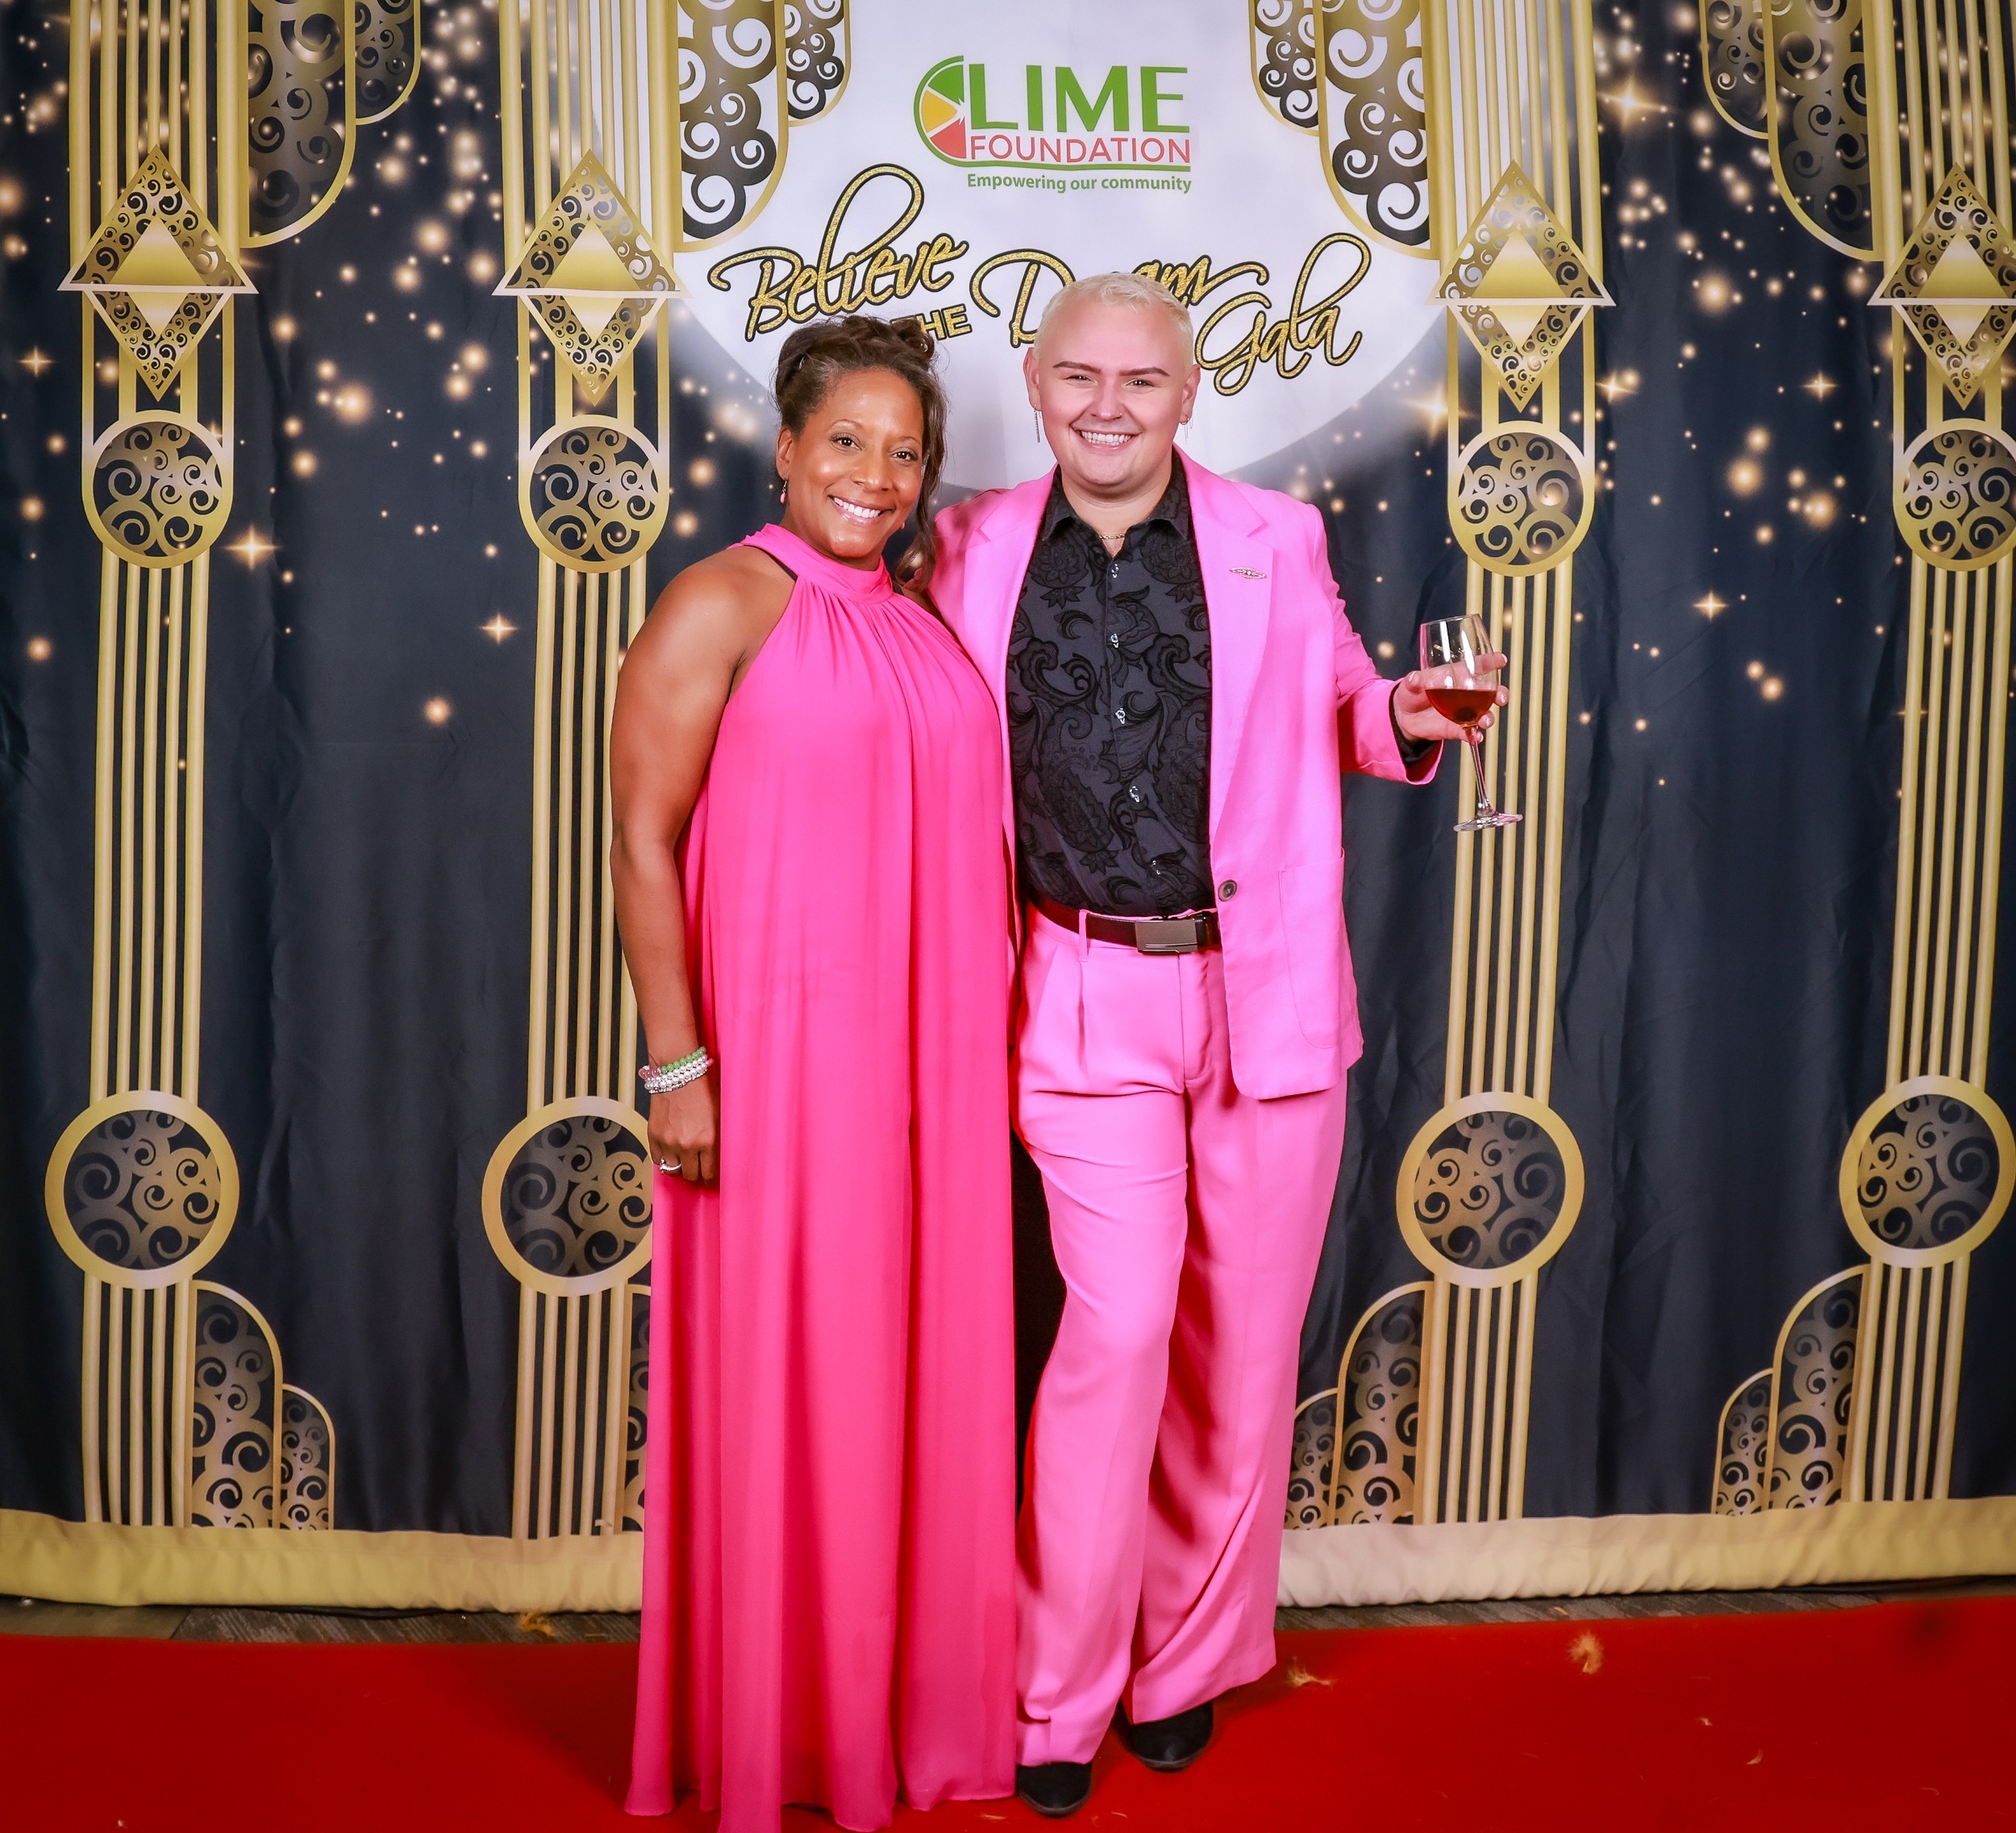 A man in a pink suit stands next to a woman in a pink dress at The LIME Foundation of Santa Rosa.